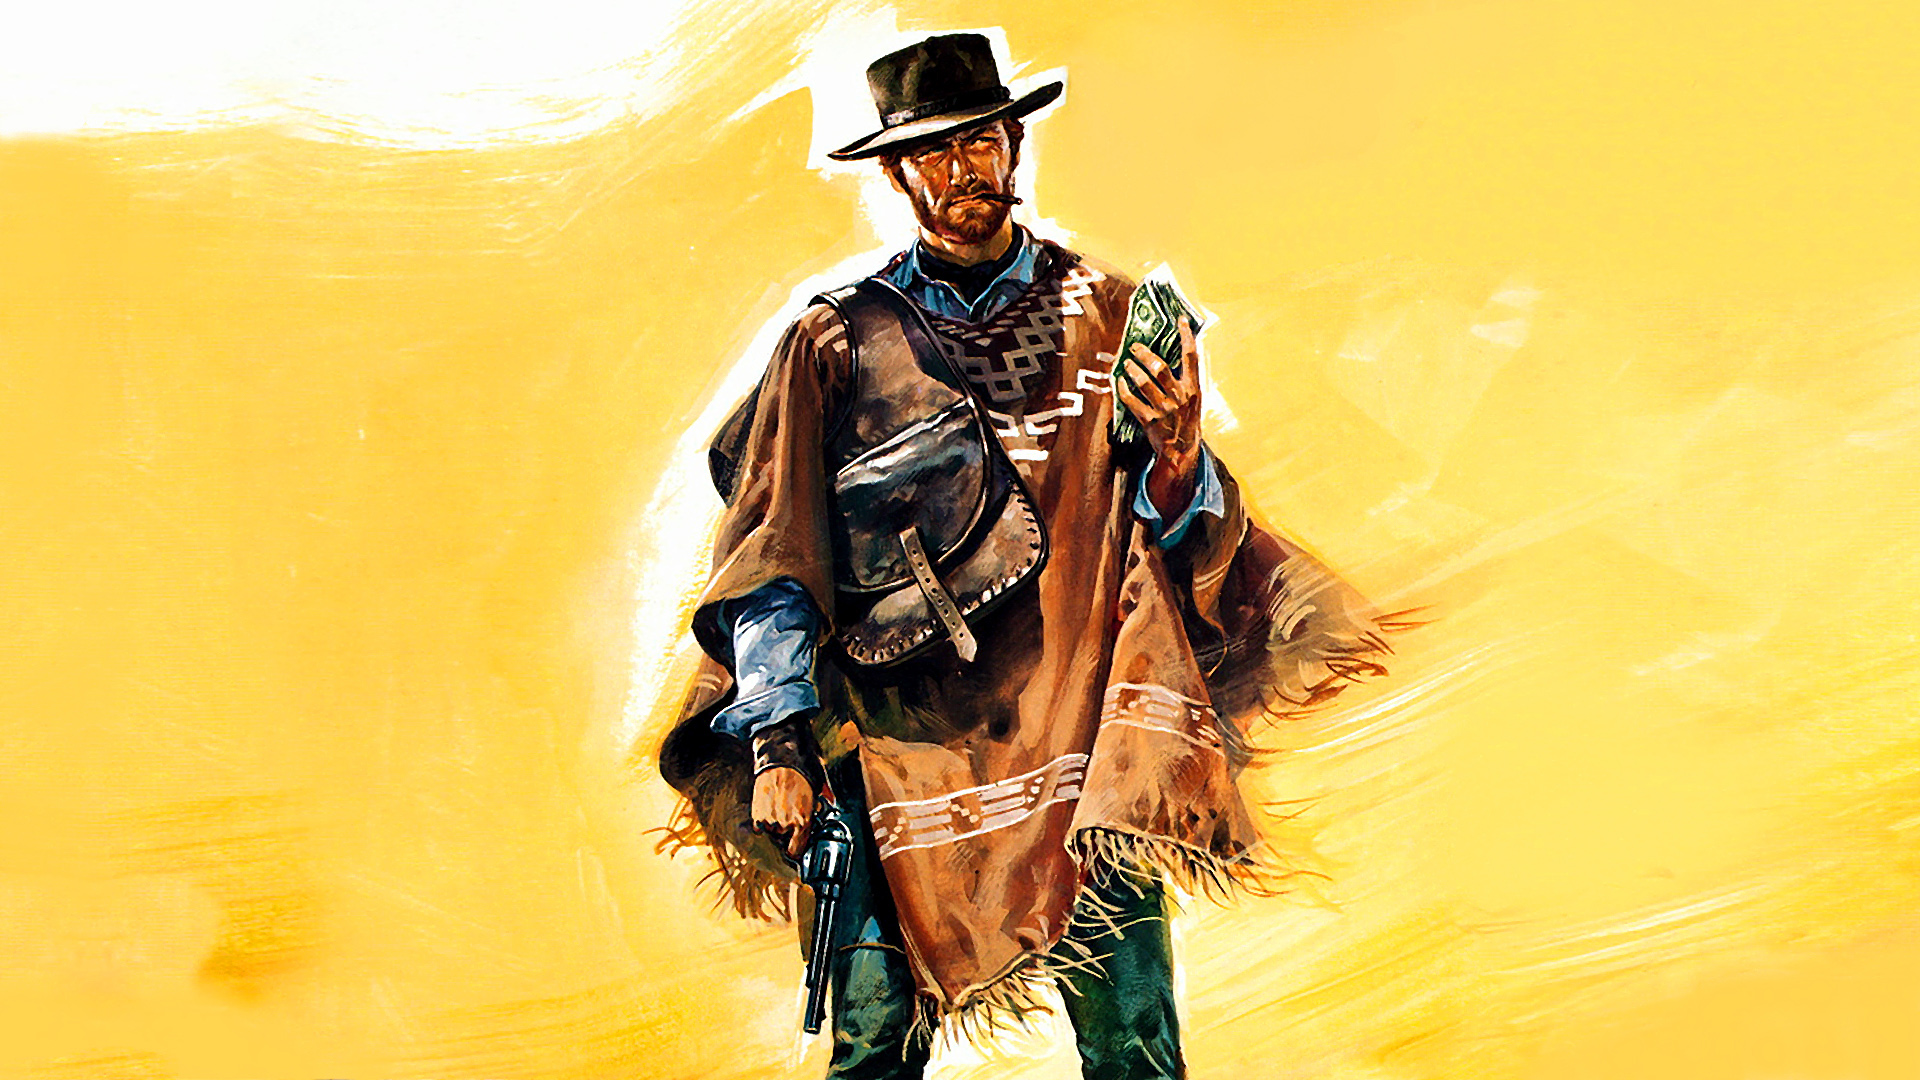 Movie A Fistful of Dollars HD Wallpaper | Background Image